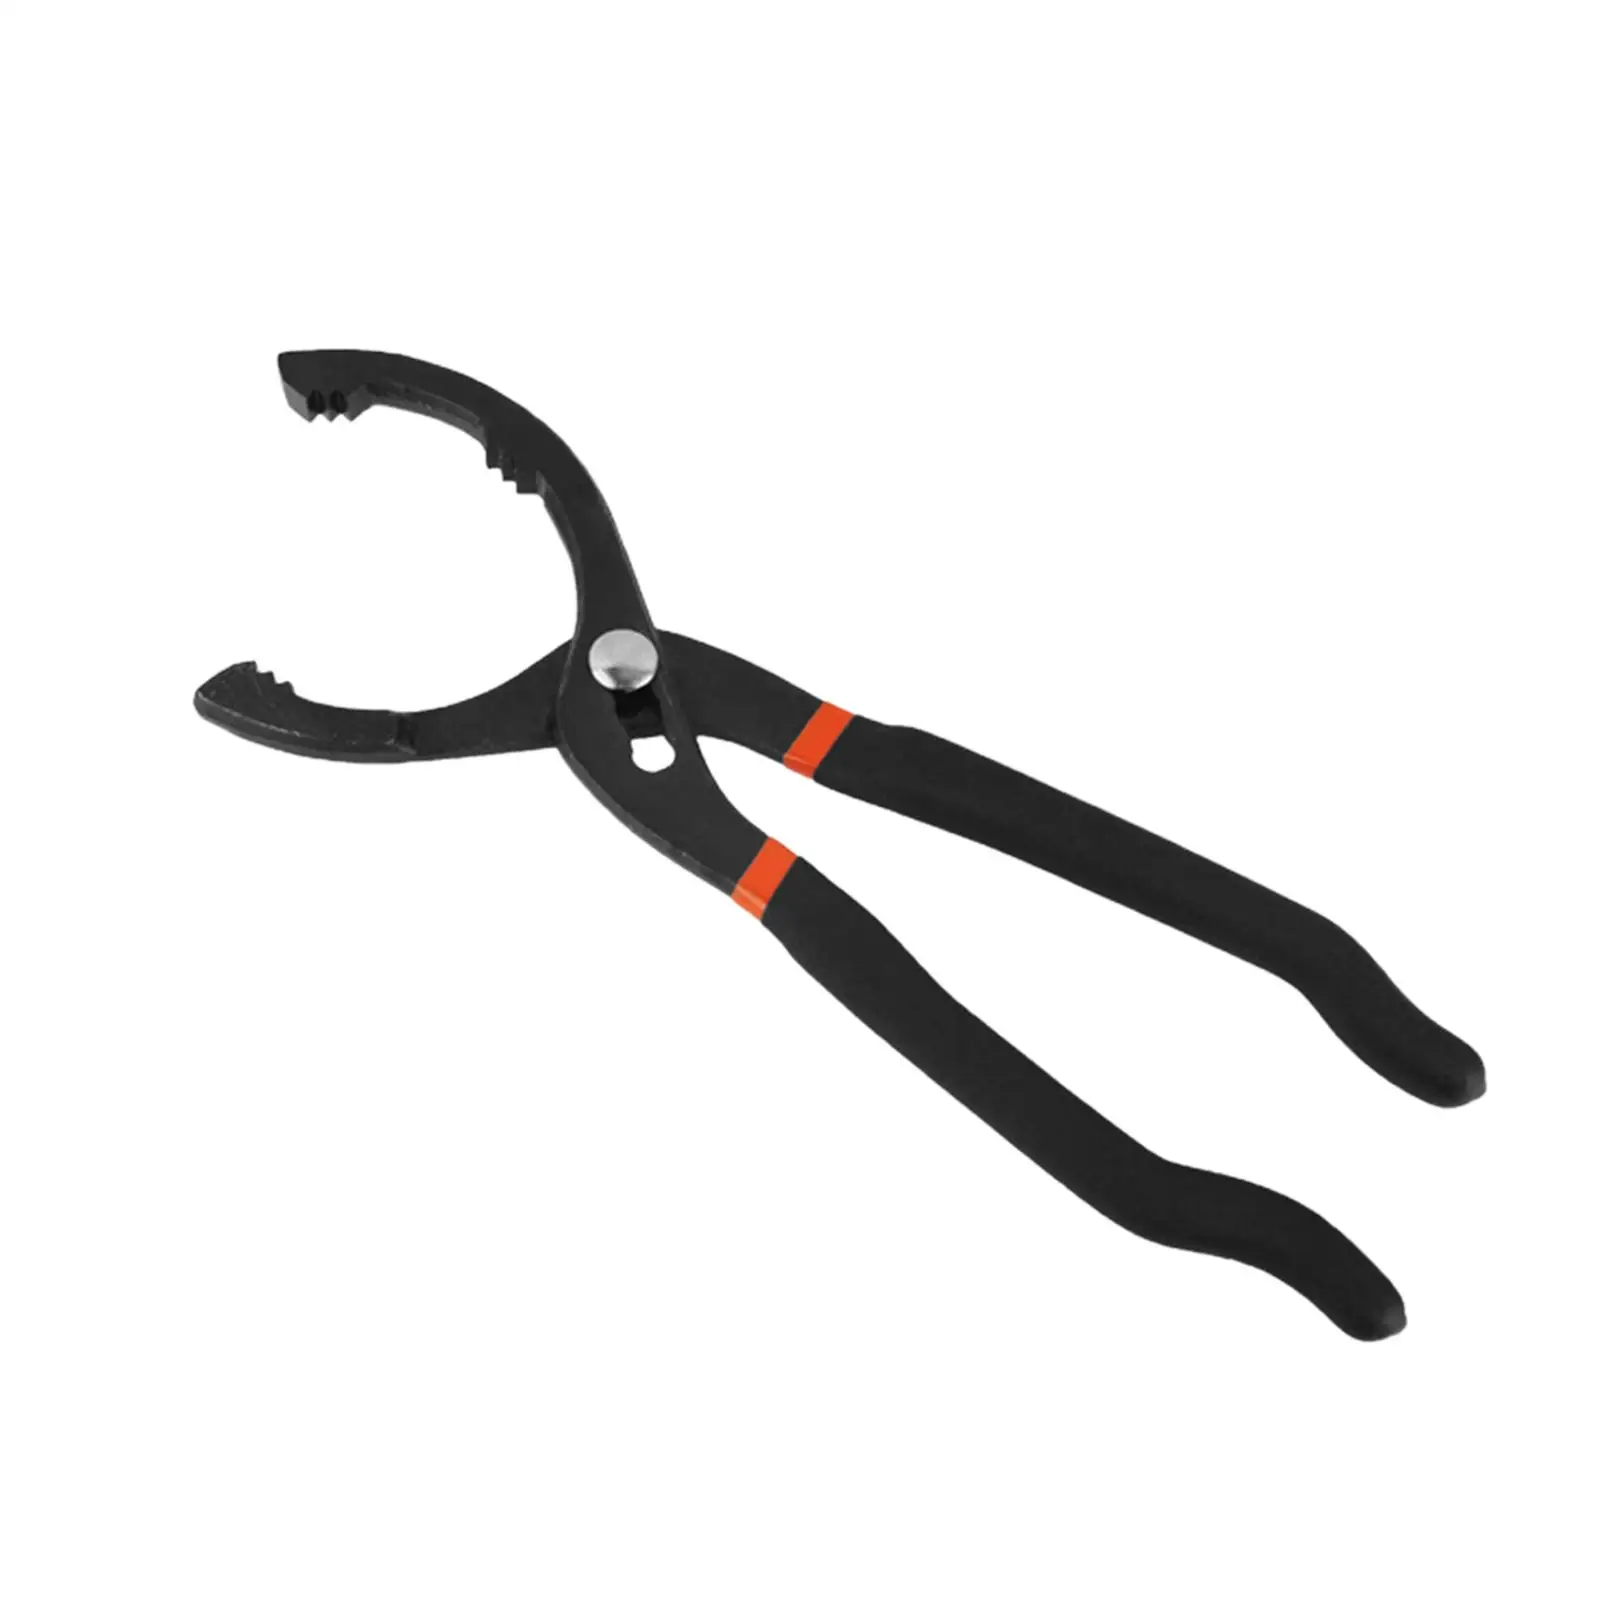 12 inch Filter Wrench Pliers Disassembly Tool Sturdy Universal Durable Useful Hand Removal Plier Adjustable Oil Filter Wrench